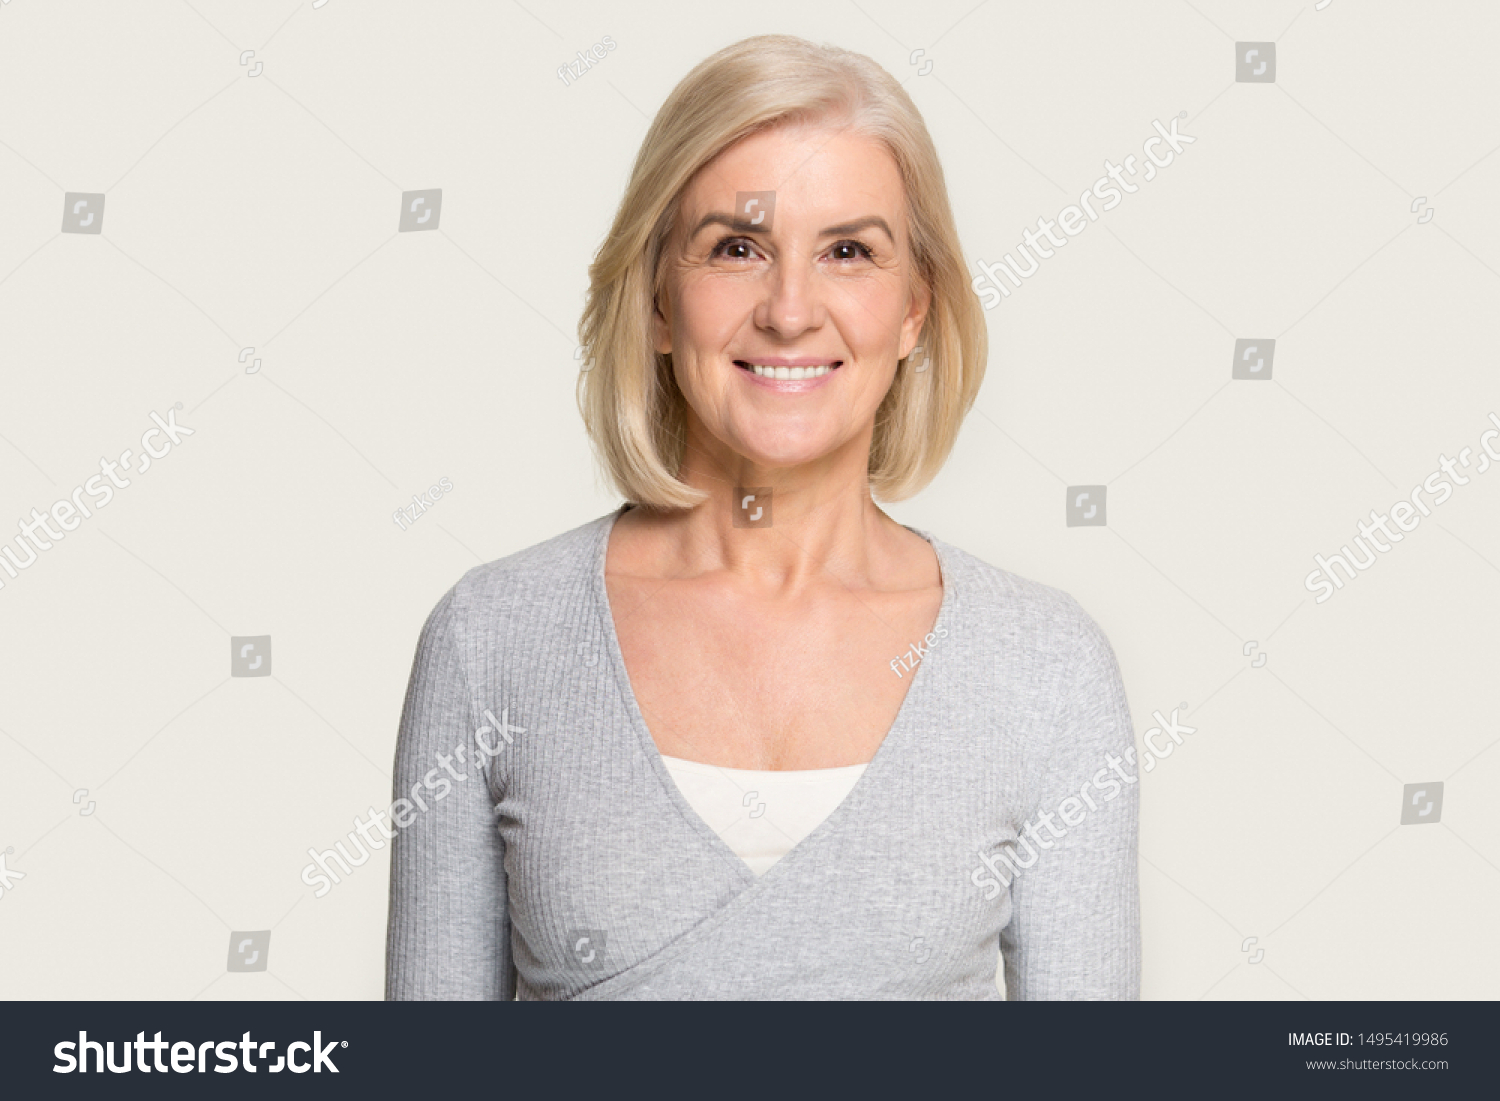 Headshot picture of happy Caucasian senior woman stand isolated on grey studio background look at camera, portrait of smiling aged female with gray hair stand posing, elderly help assistance concept #1495419986